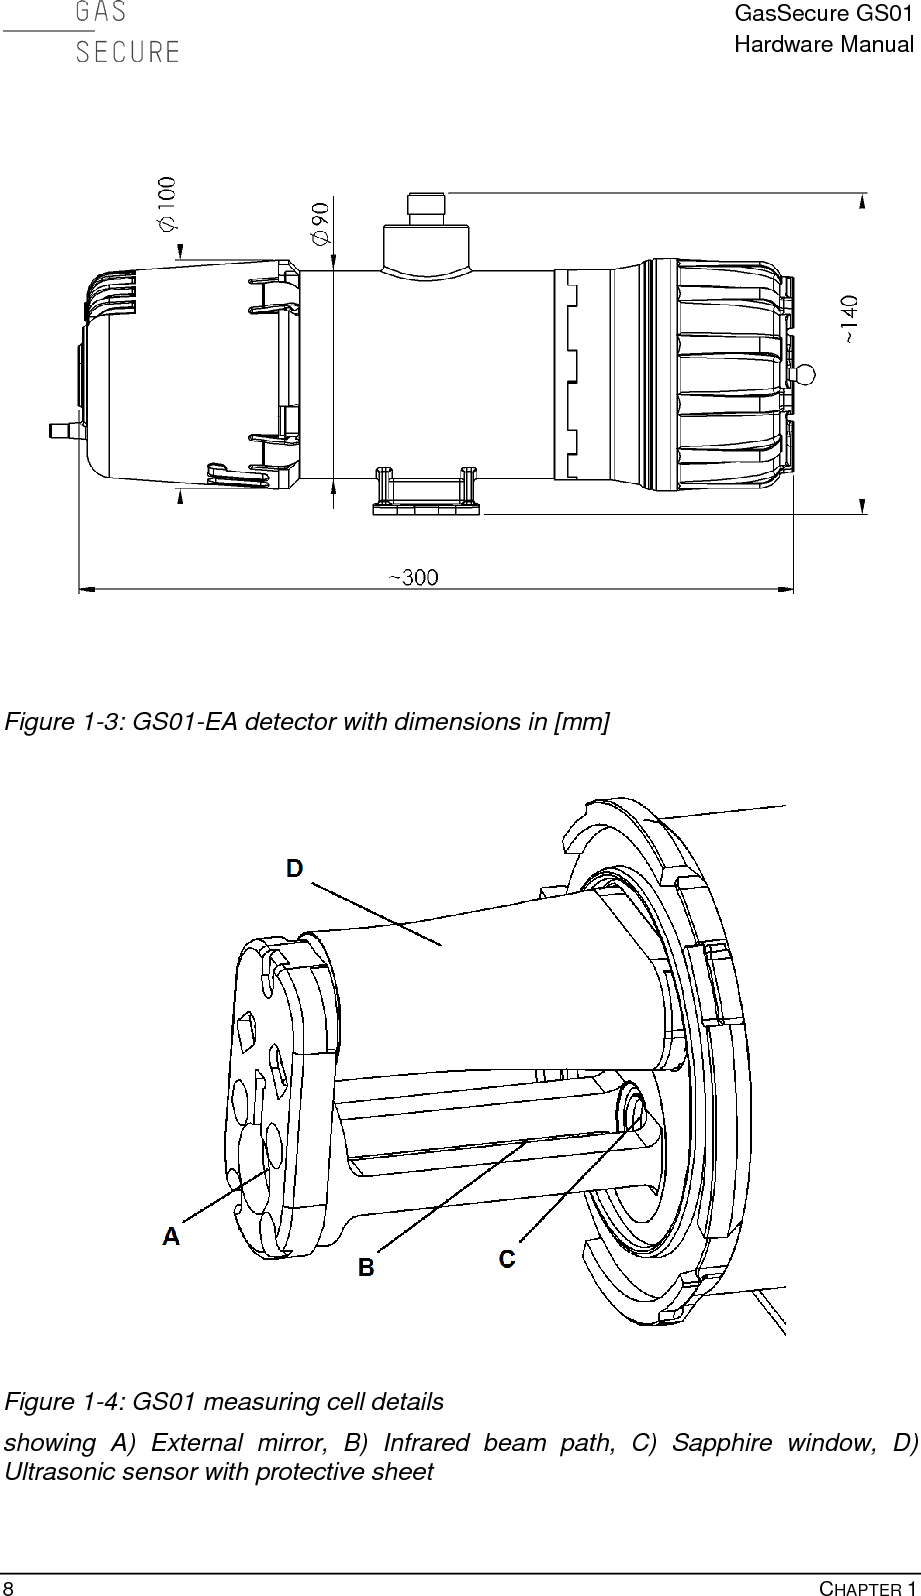  GasSecure GS01 Hardware Manual  8    CHAPTER 1    Figure 1-3: GS01-EA detector with dimensions in [mm]    Figure 1-4: GS01 measuring cell details showing A) External mirror, B) Infrared beam path, C) Sapphire window, D) Ultrasonic sensor with protective sheet 